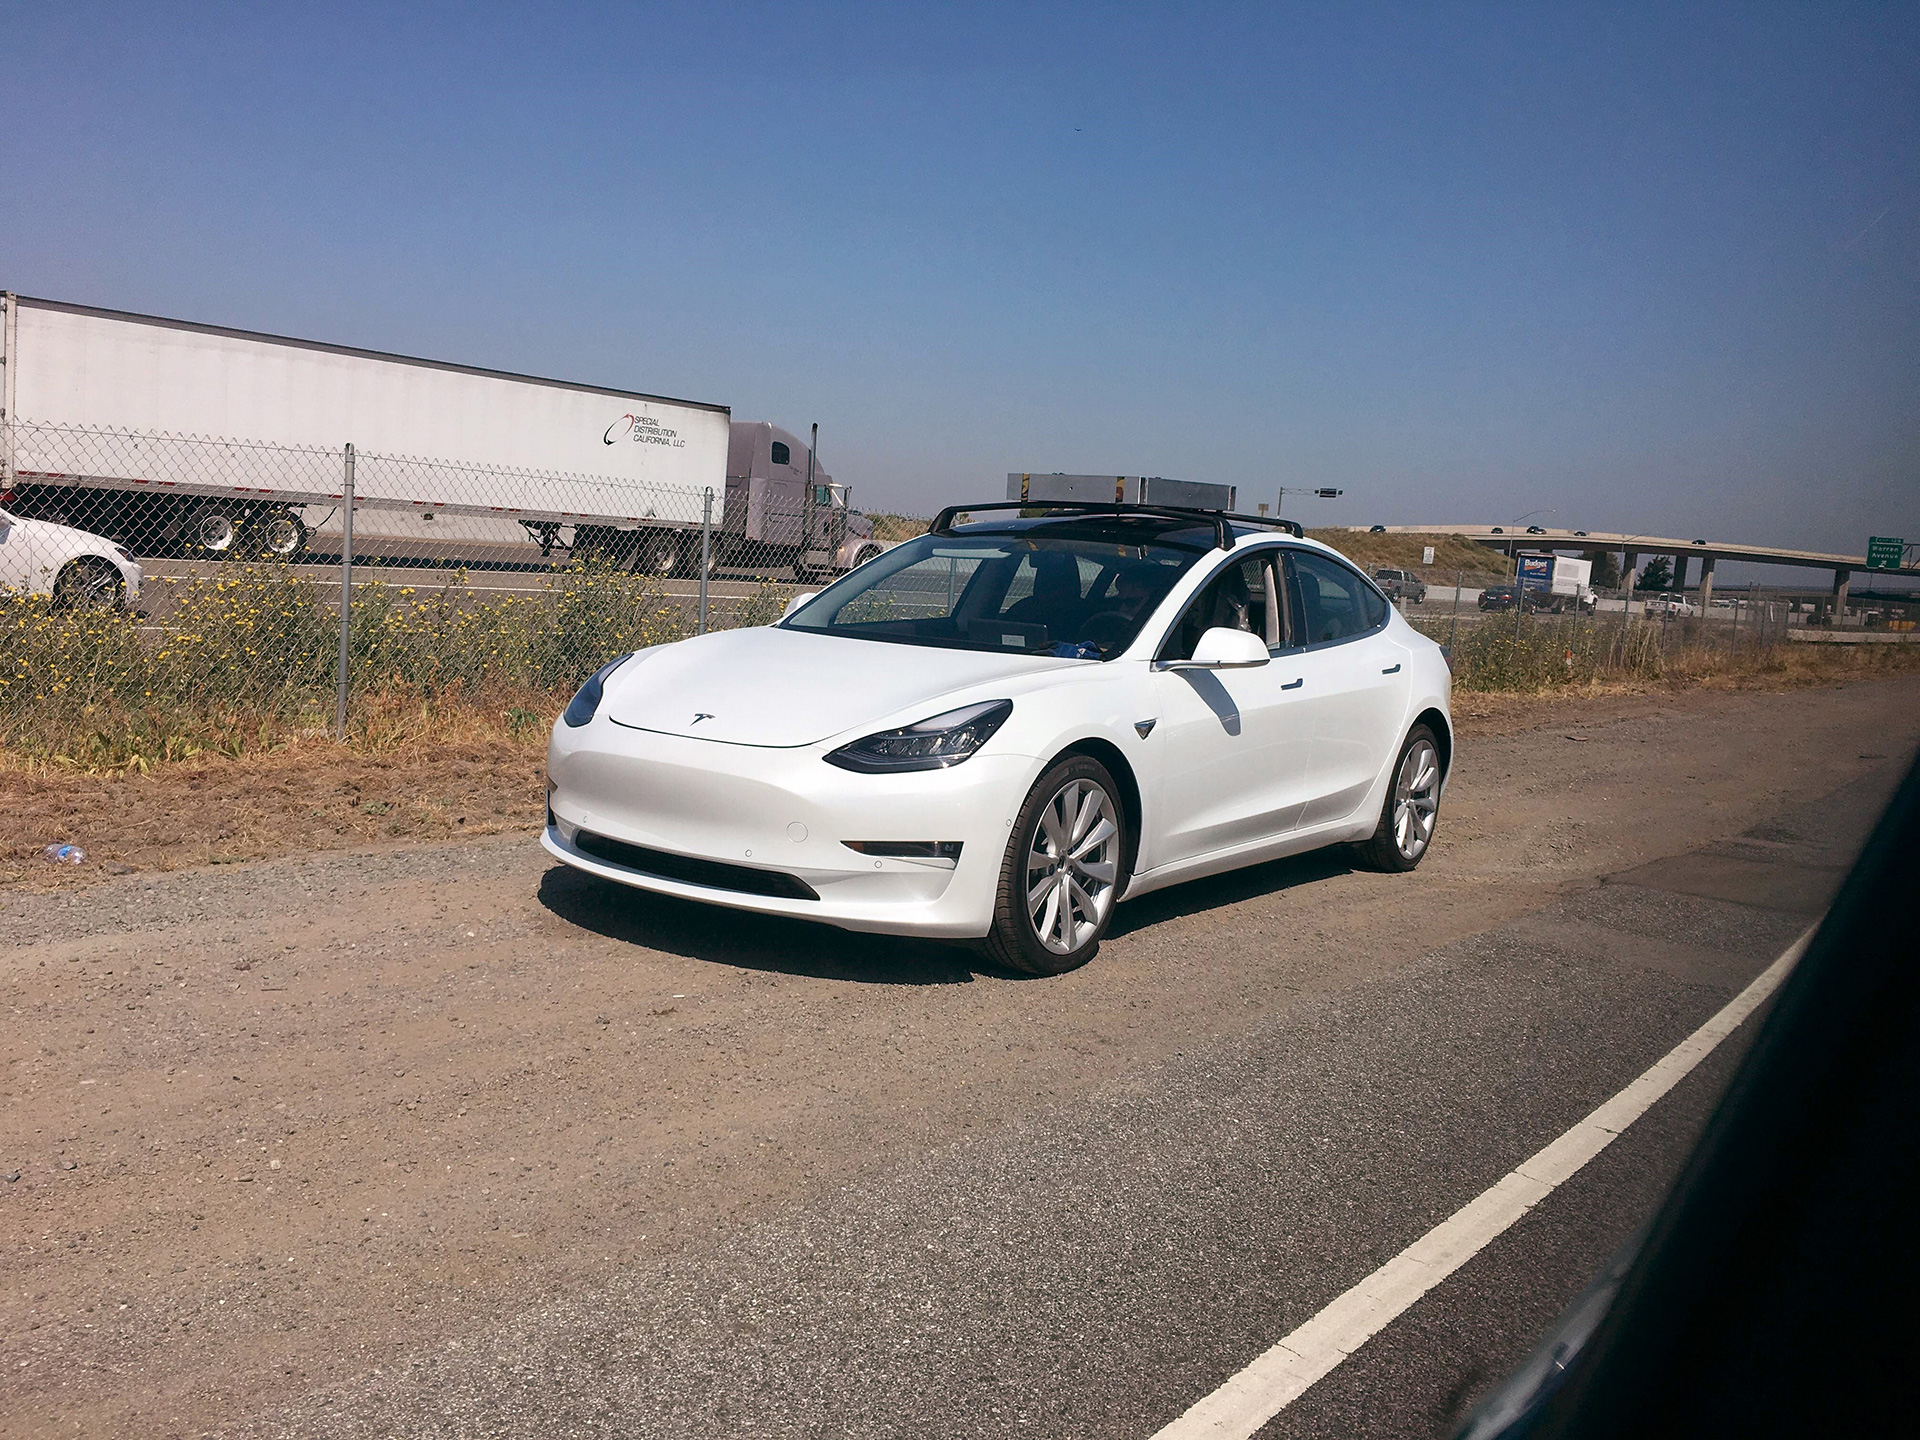 Tesla Model 3 testing with a roof rack system